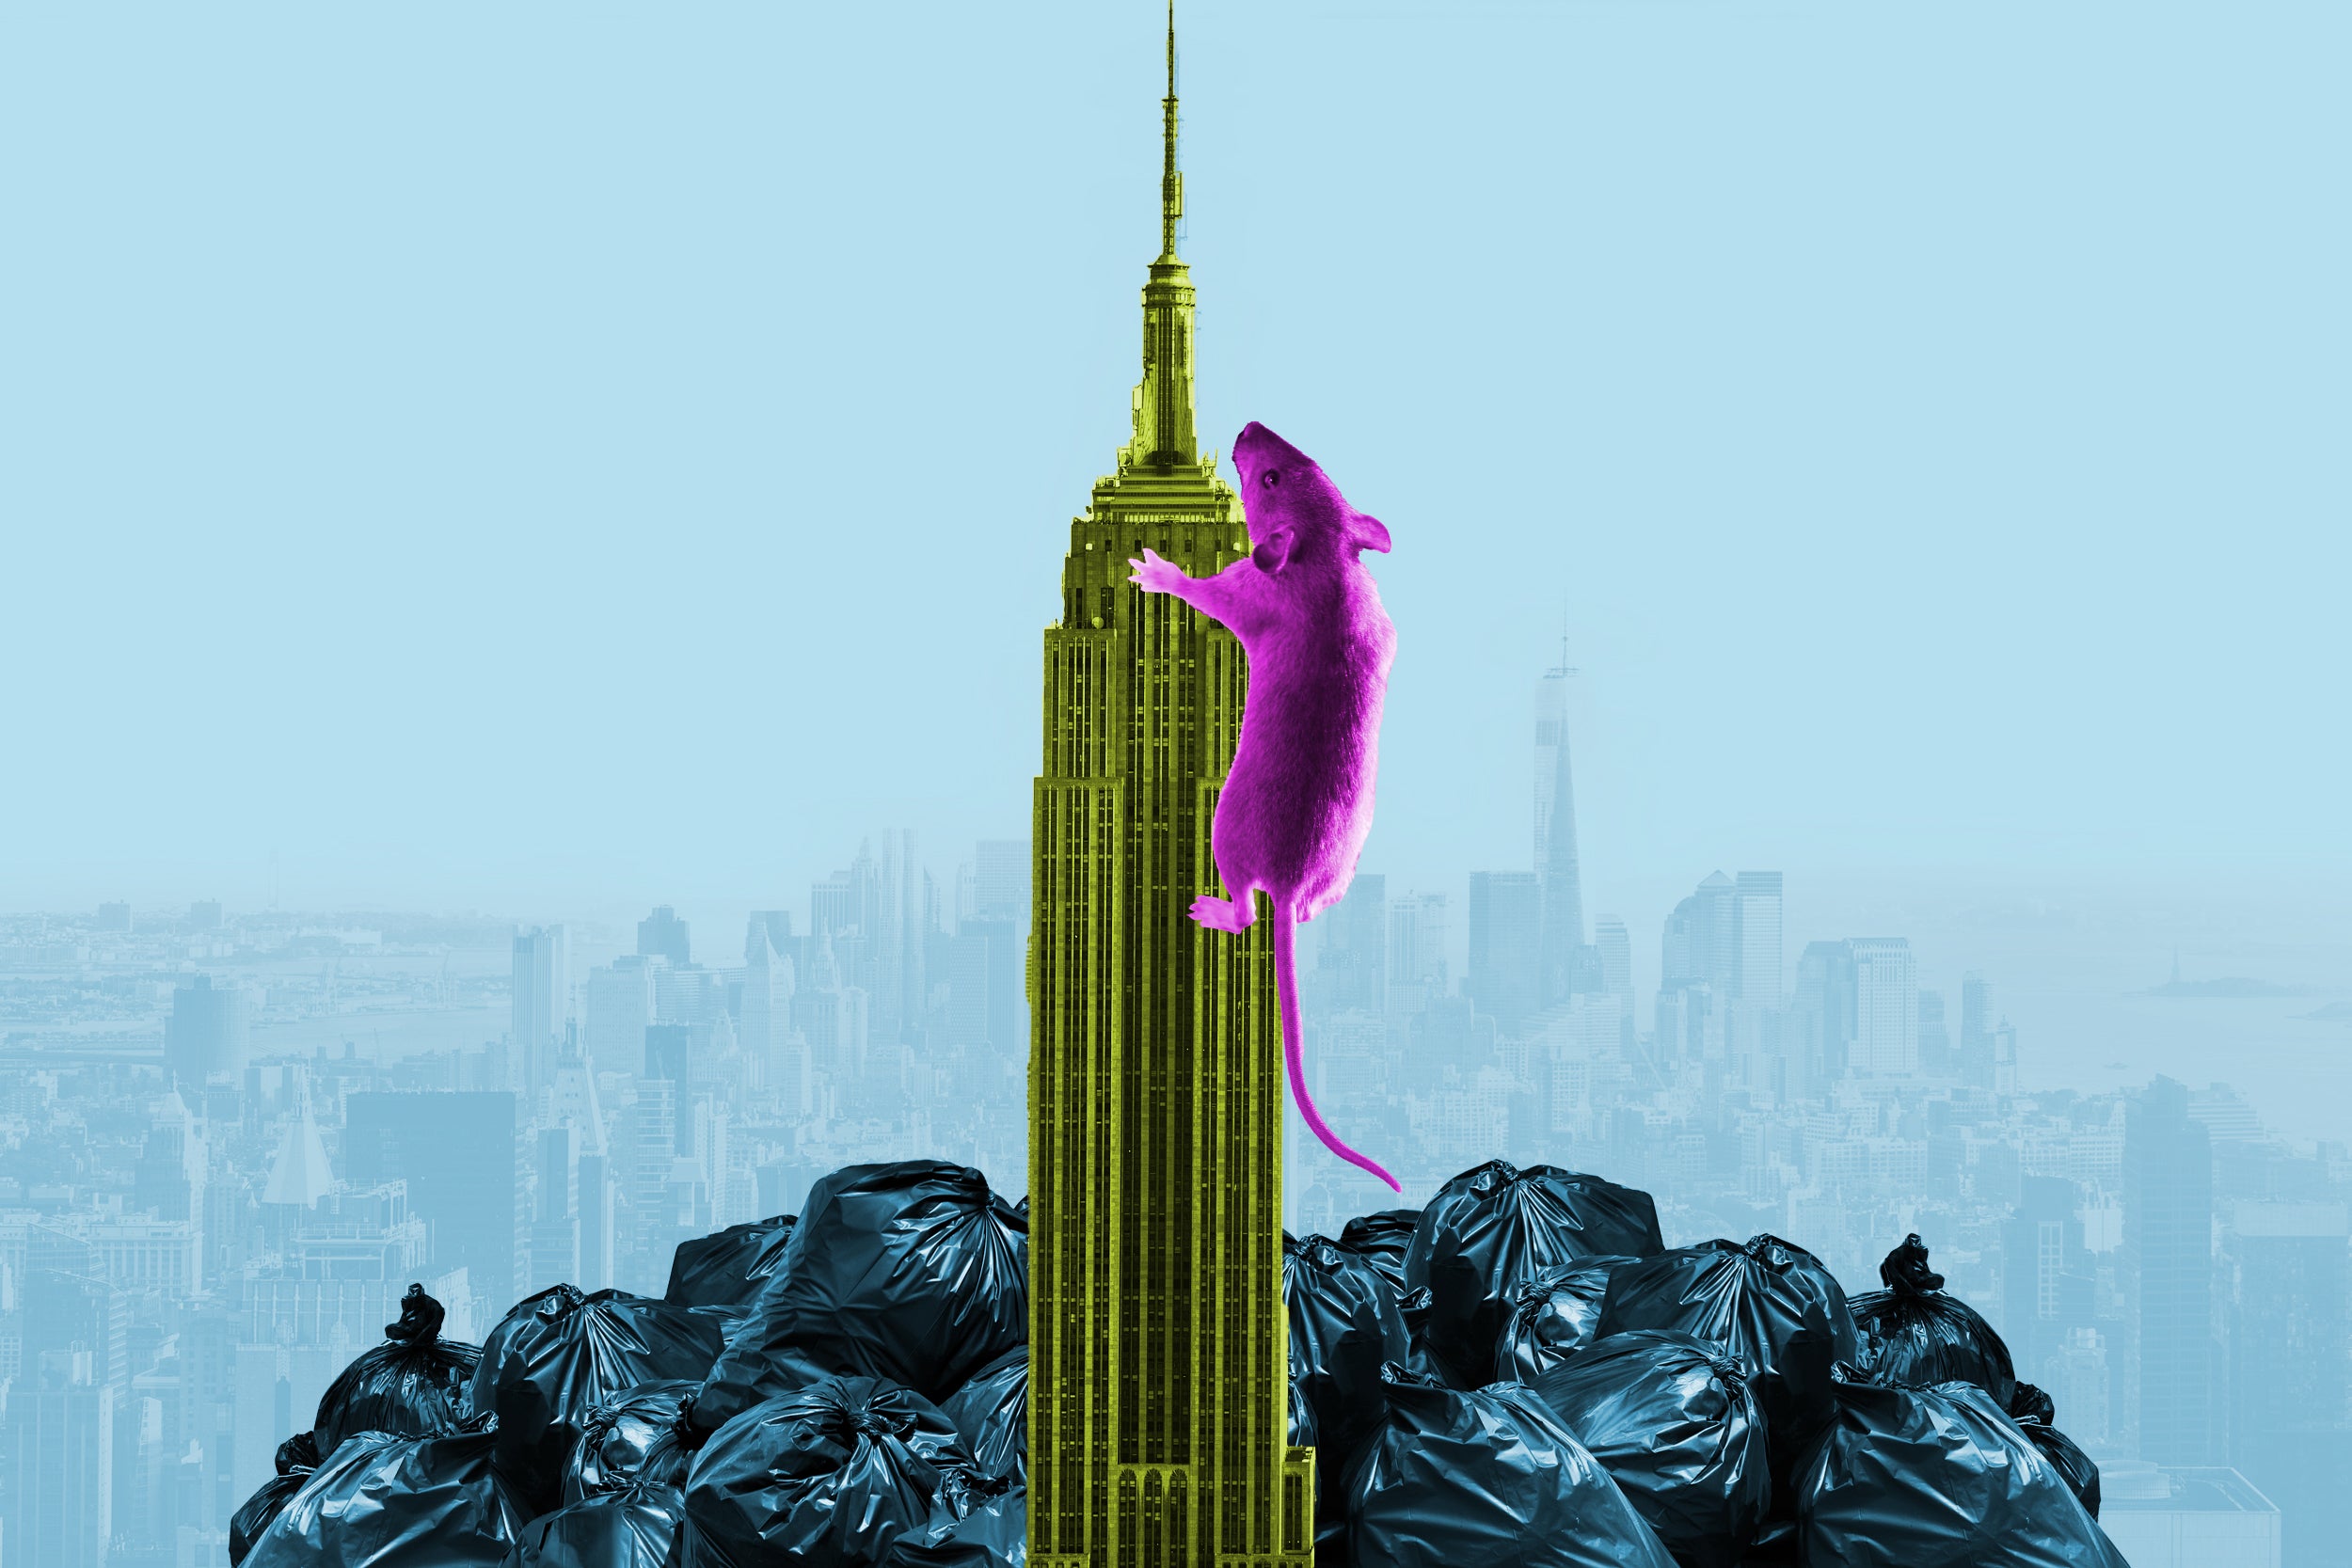 Photo illustration of rat climbing Empire State building surrounded by piles of trash.